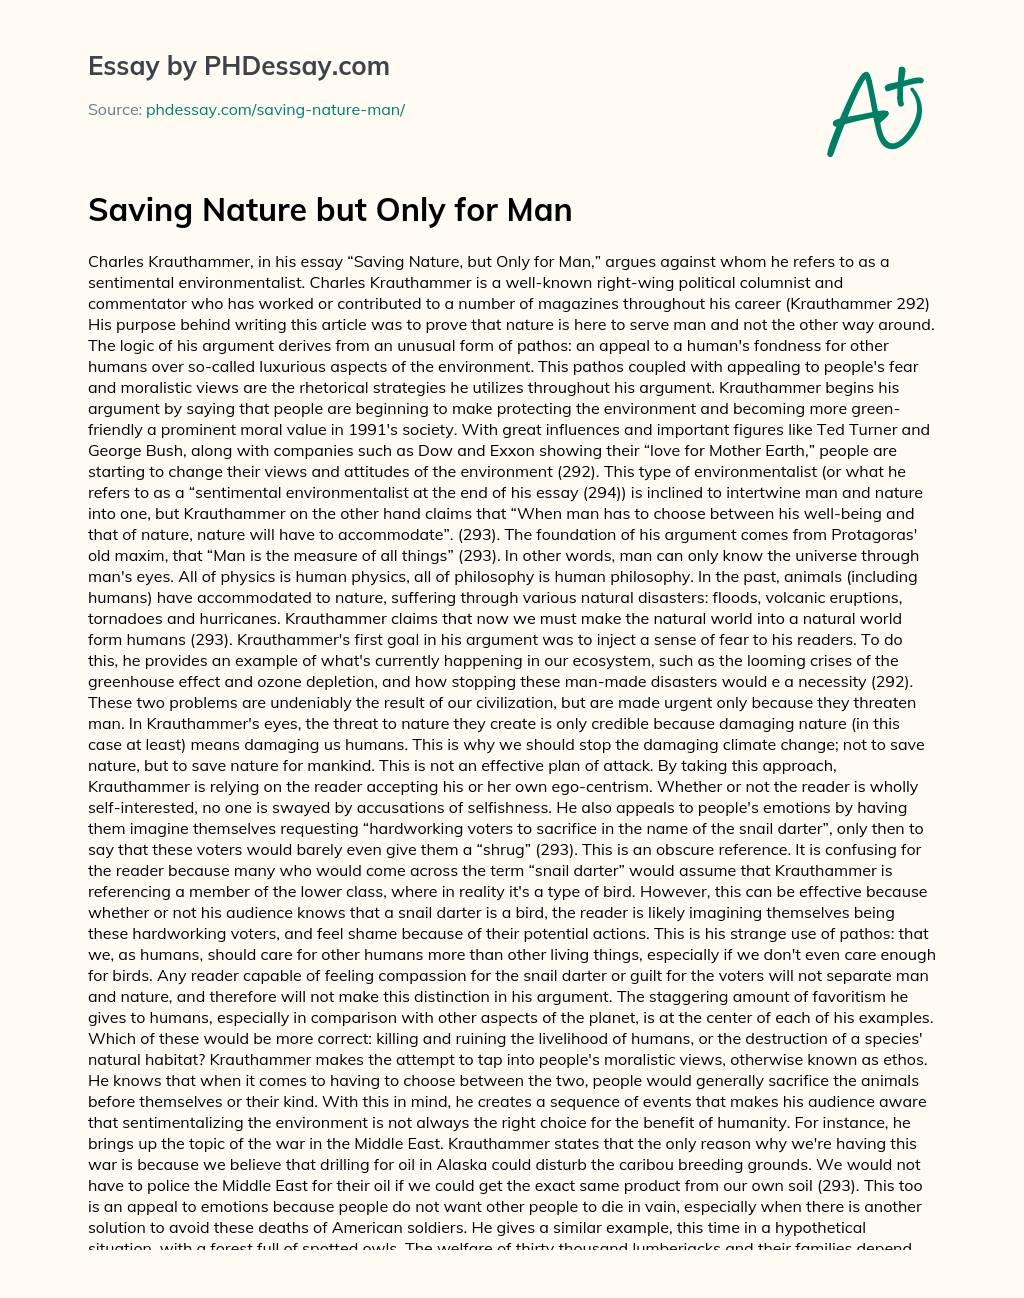 Saving Nature but Only for Man essay